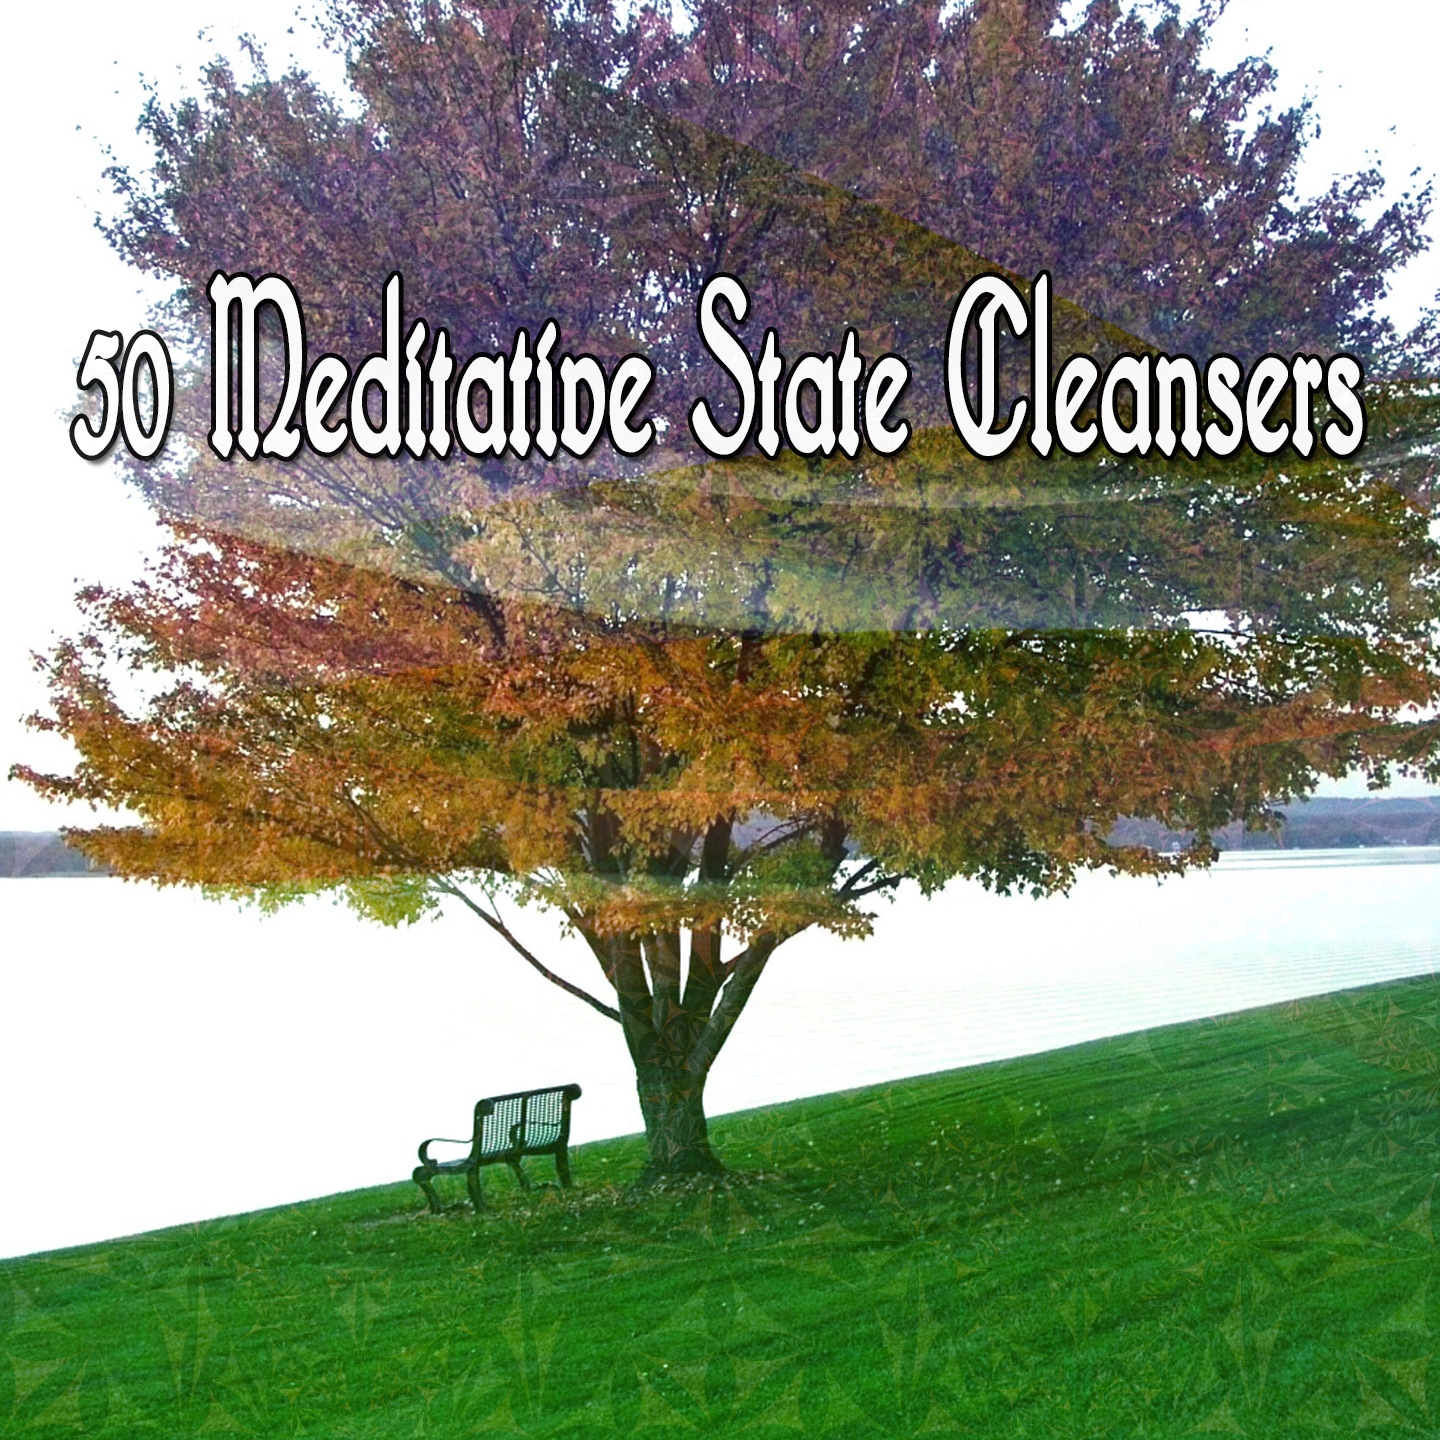 50 Meditative State Cleansers